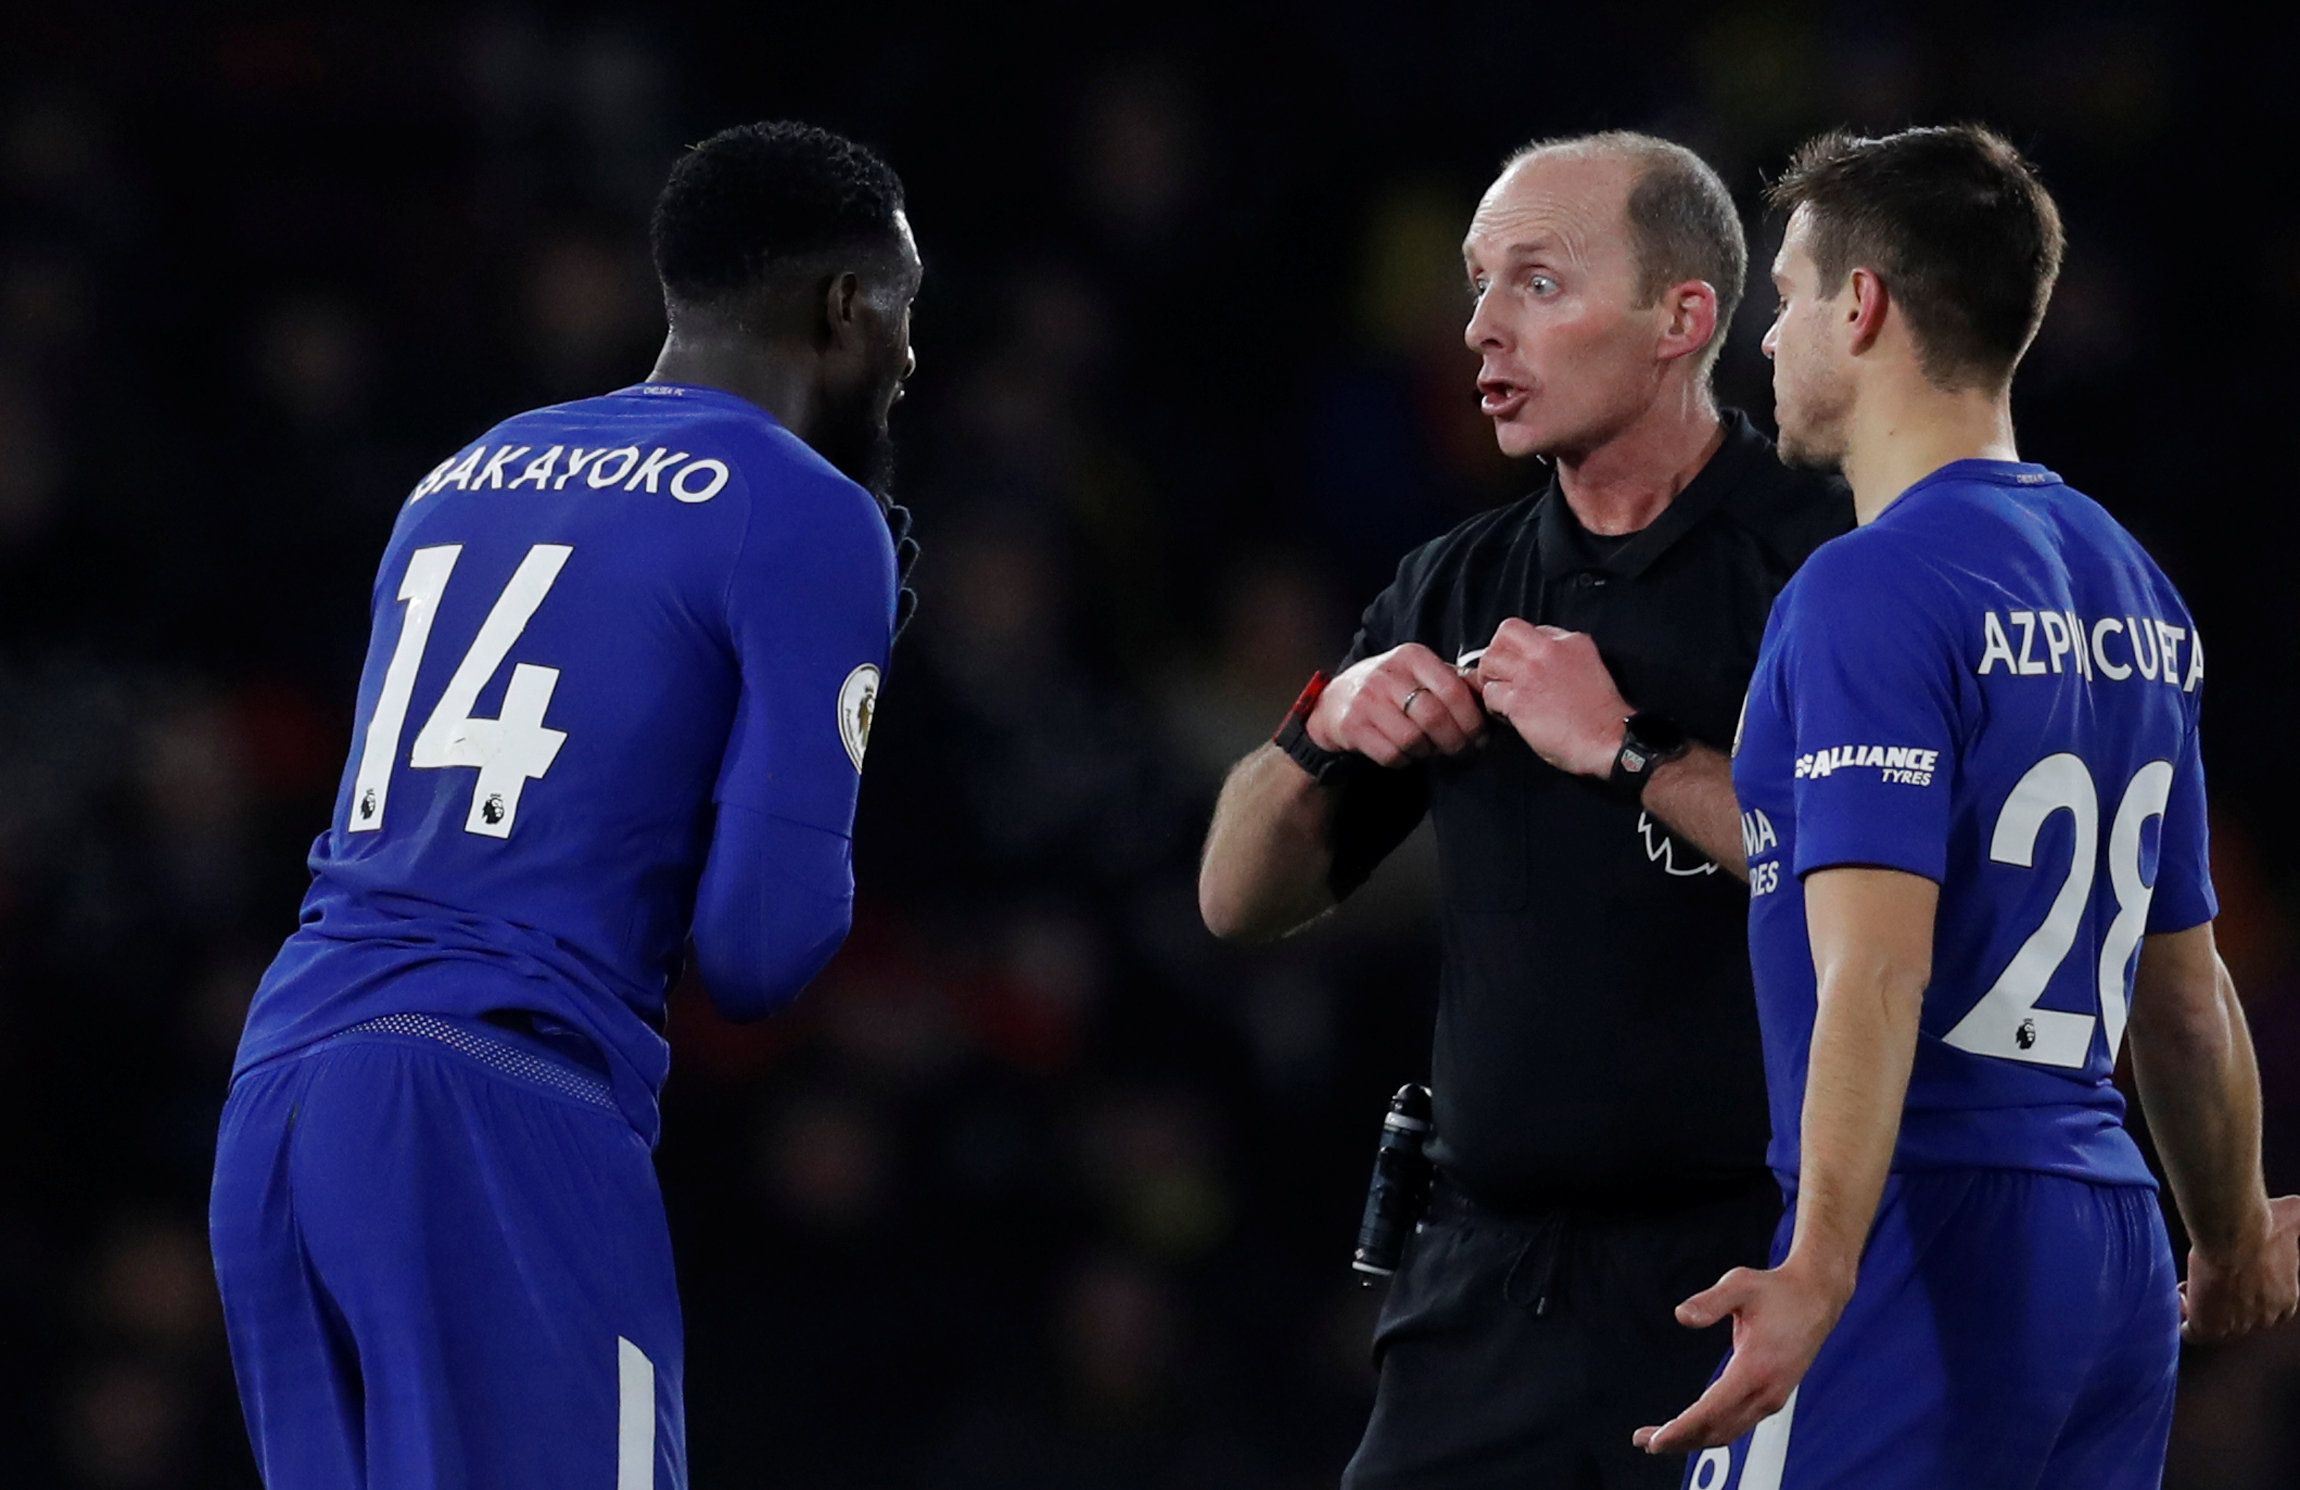 Soccer Football - Premier League - Watford vs Chelsea - Vicarage Road, Watford, Britain - February 5, 2018   Chelsea's Tiemoue Bakayoko reacts as he is sent off by Mike Dean         Action Images via Reuters/Andrew Couldridge    EDITORIAL USE ONLY. No use with unauthorized audio, video, data, fixture lists, club/league logos or "live" services. Online in-match use limited to 75 images, no video emulation. No use in betting, games or single club/league/player publications.  Please contact your ac